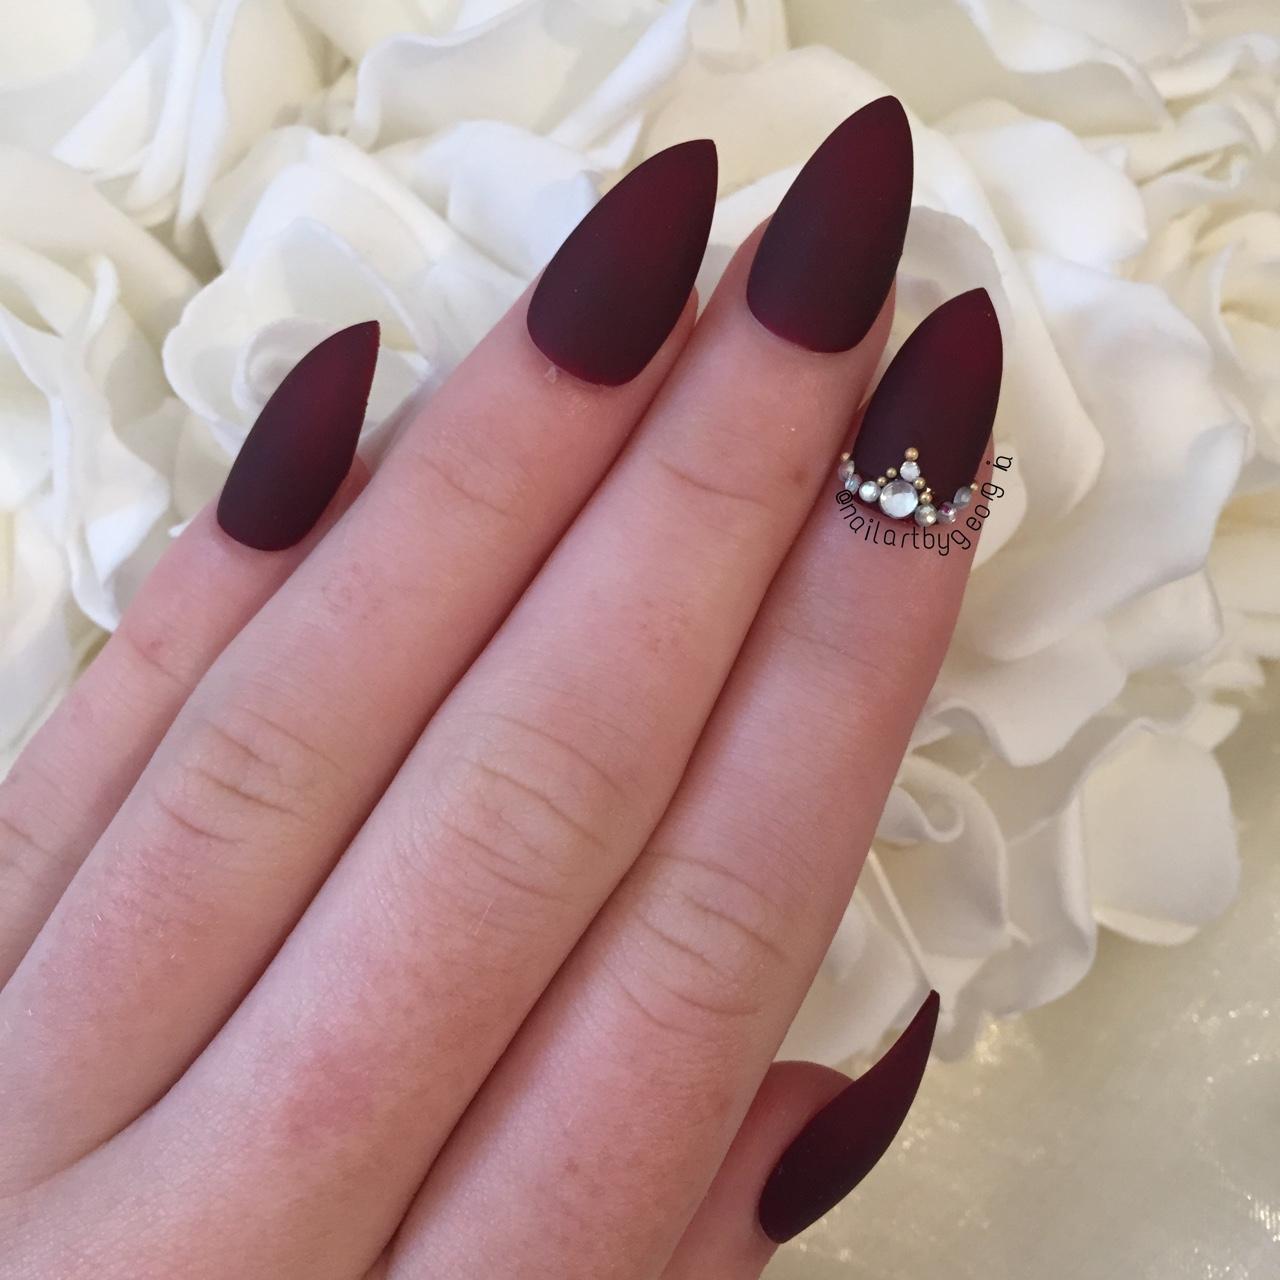 Burgundy Matte Nails To Try This Season - Nail Designs Journal